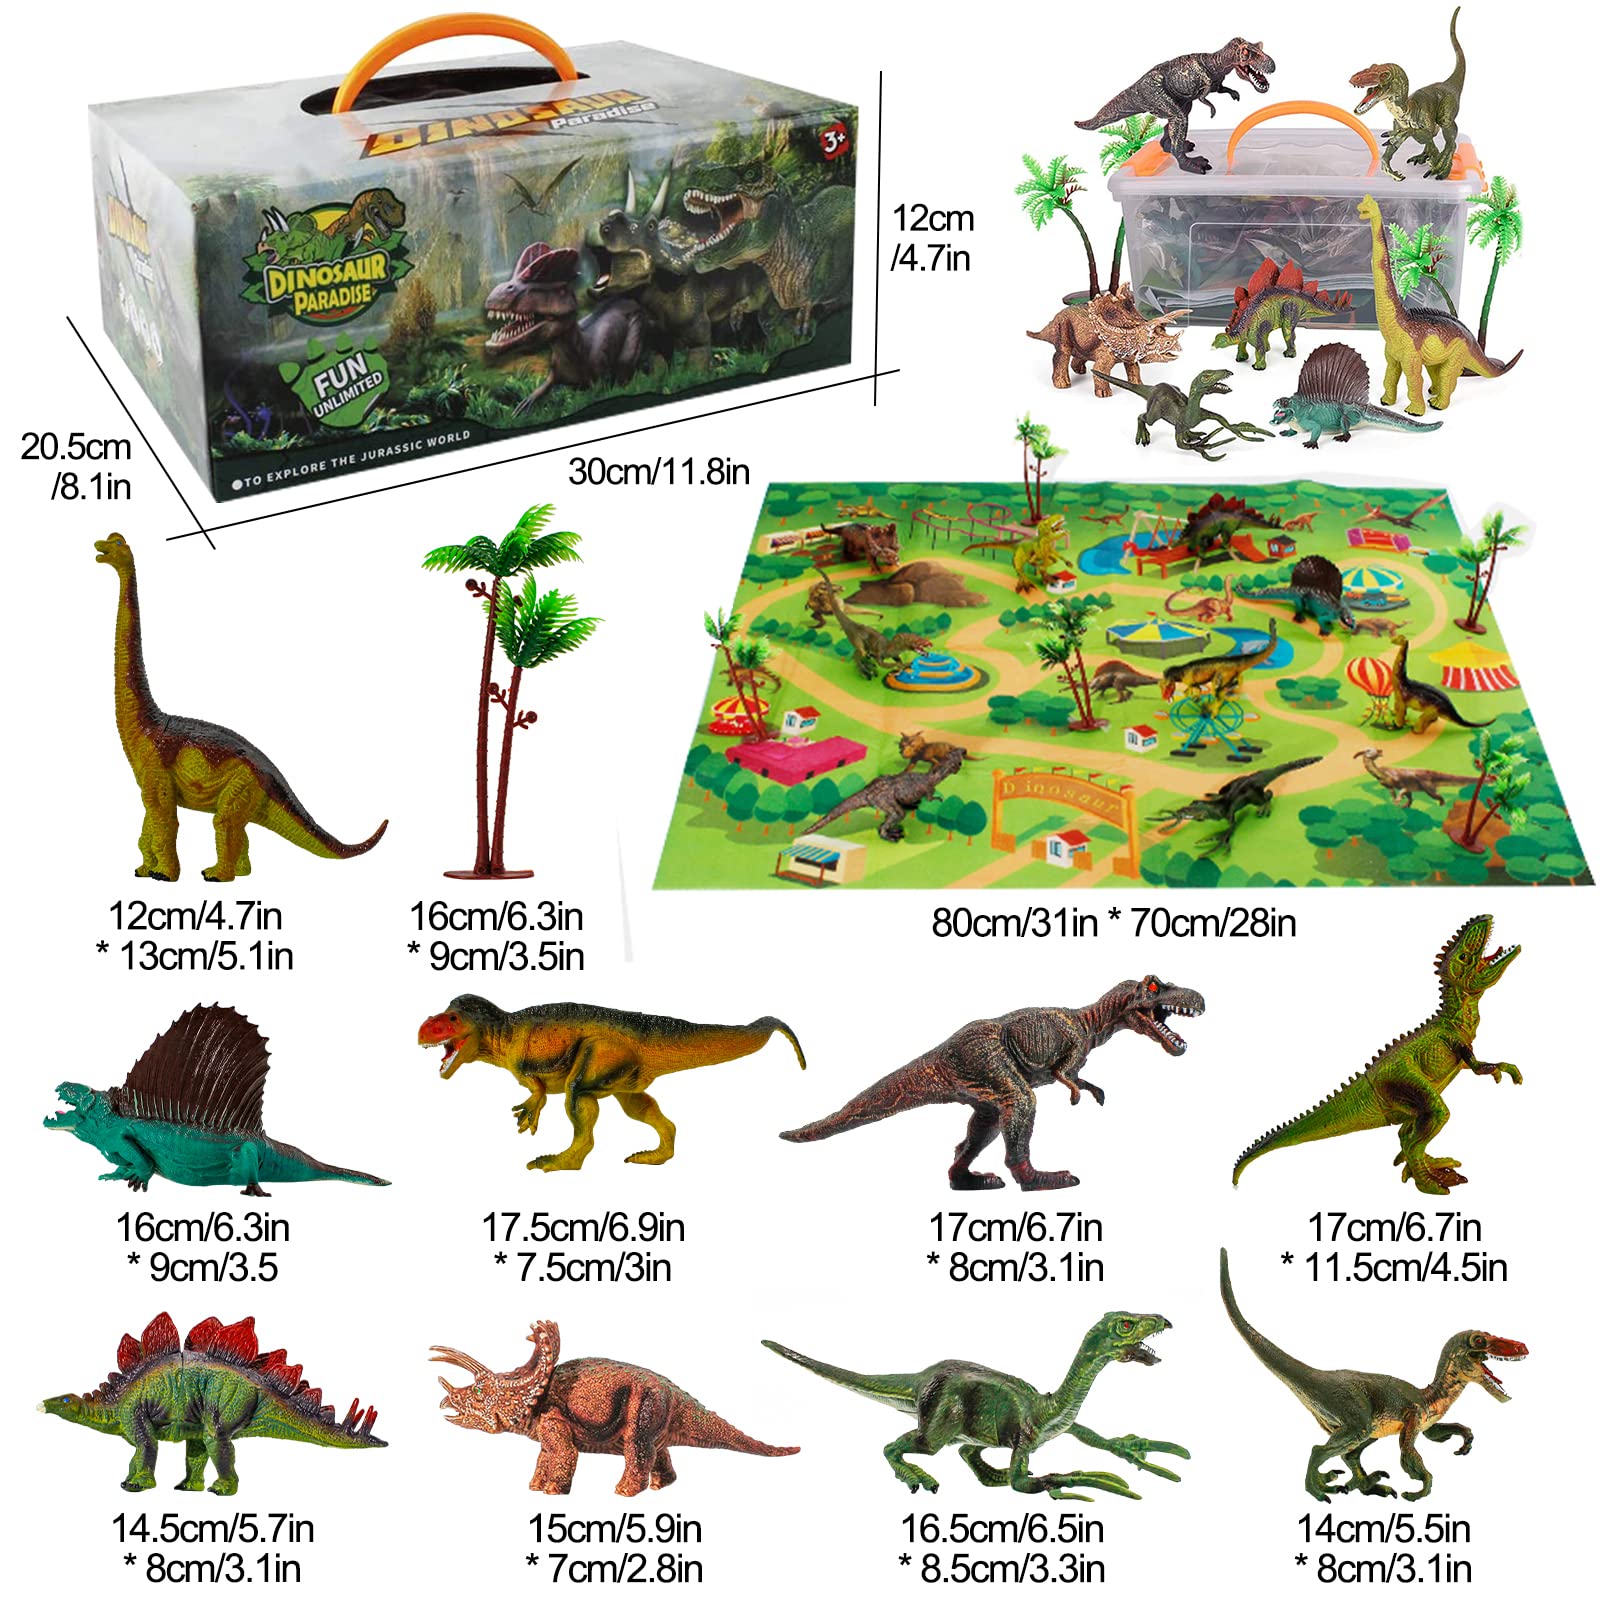 SUNWUKING Toddler Dinosaur Toy with Play Mat - Realistic Dino Toys for Kids, Dinosaur Playset for Dino Lovers Ideal Gift for Boys and Girls